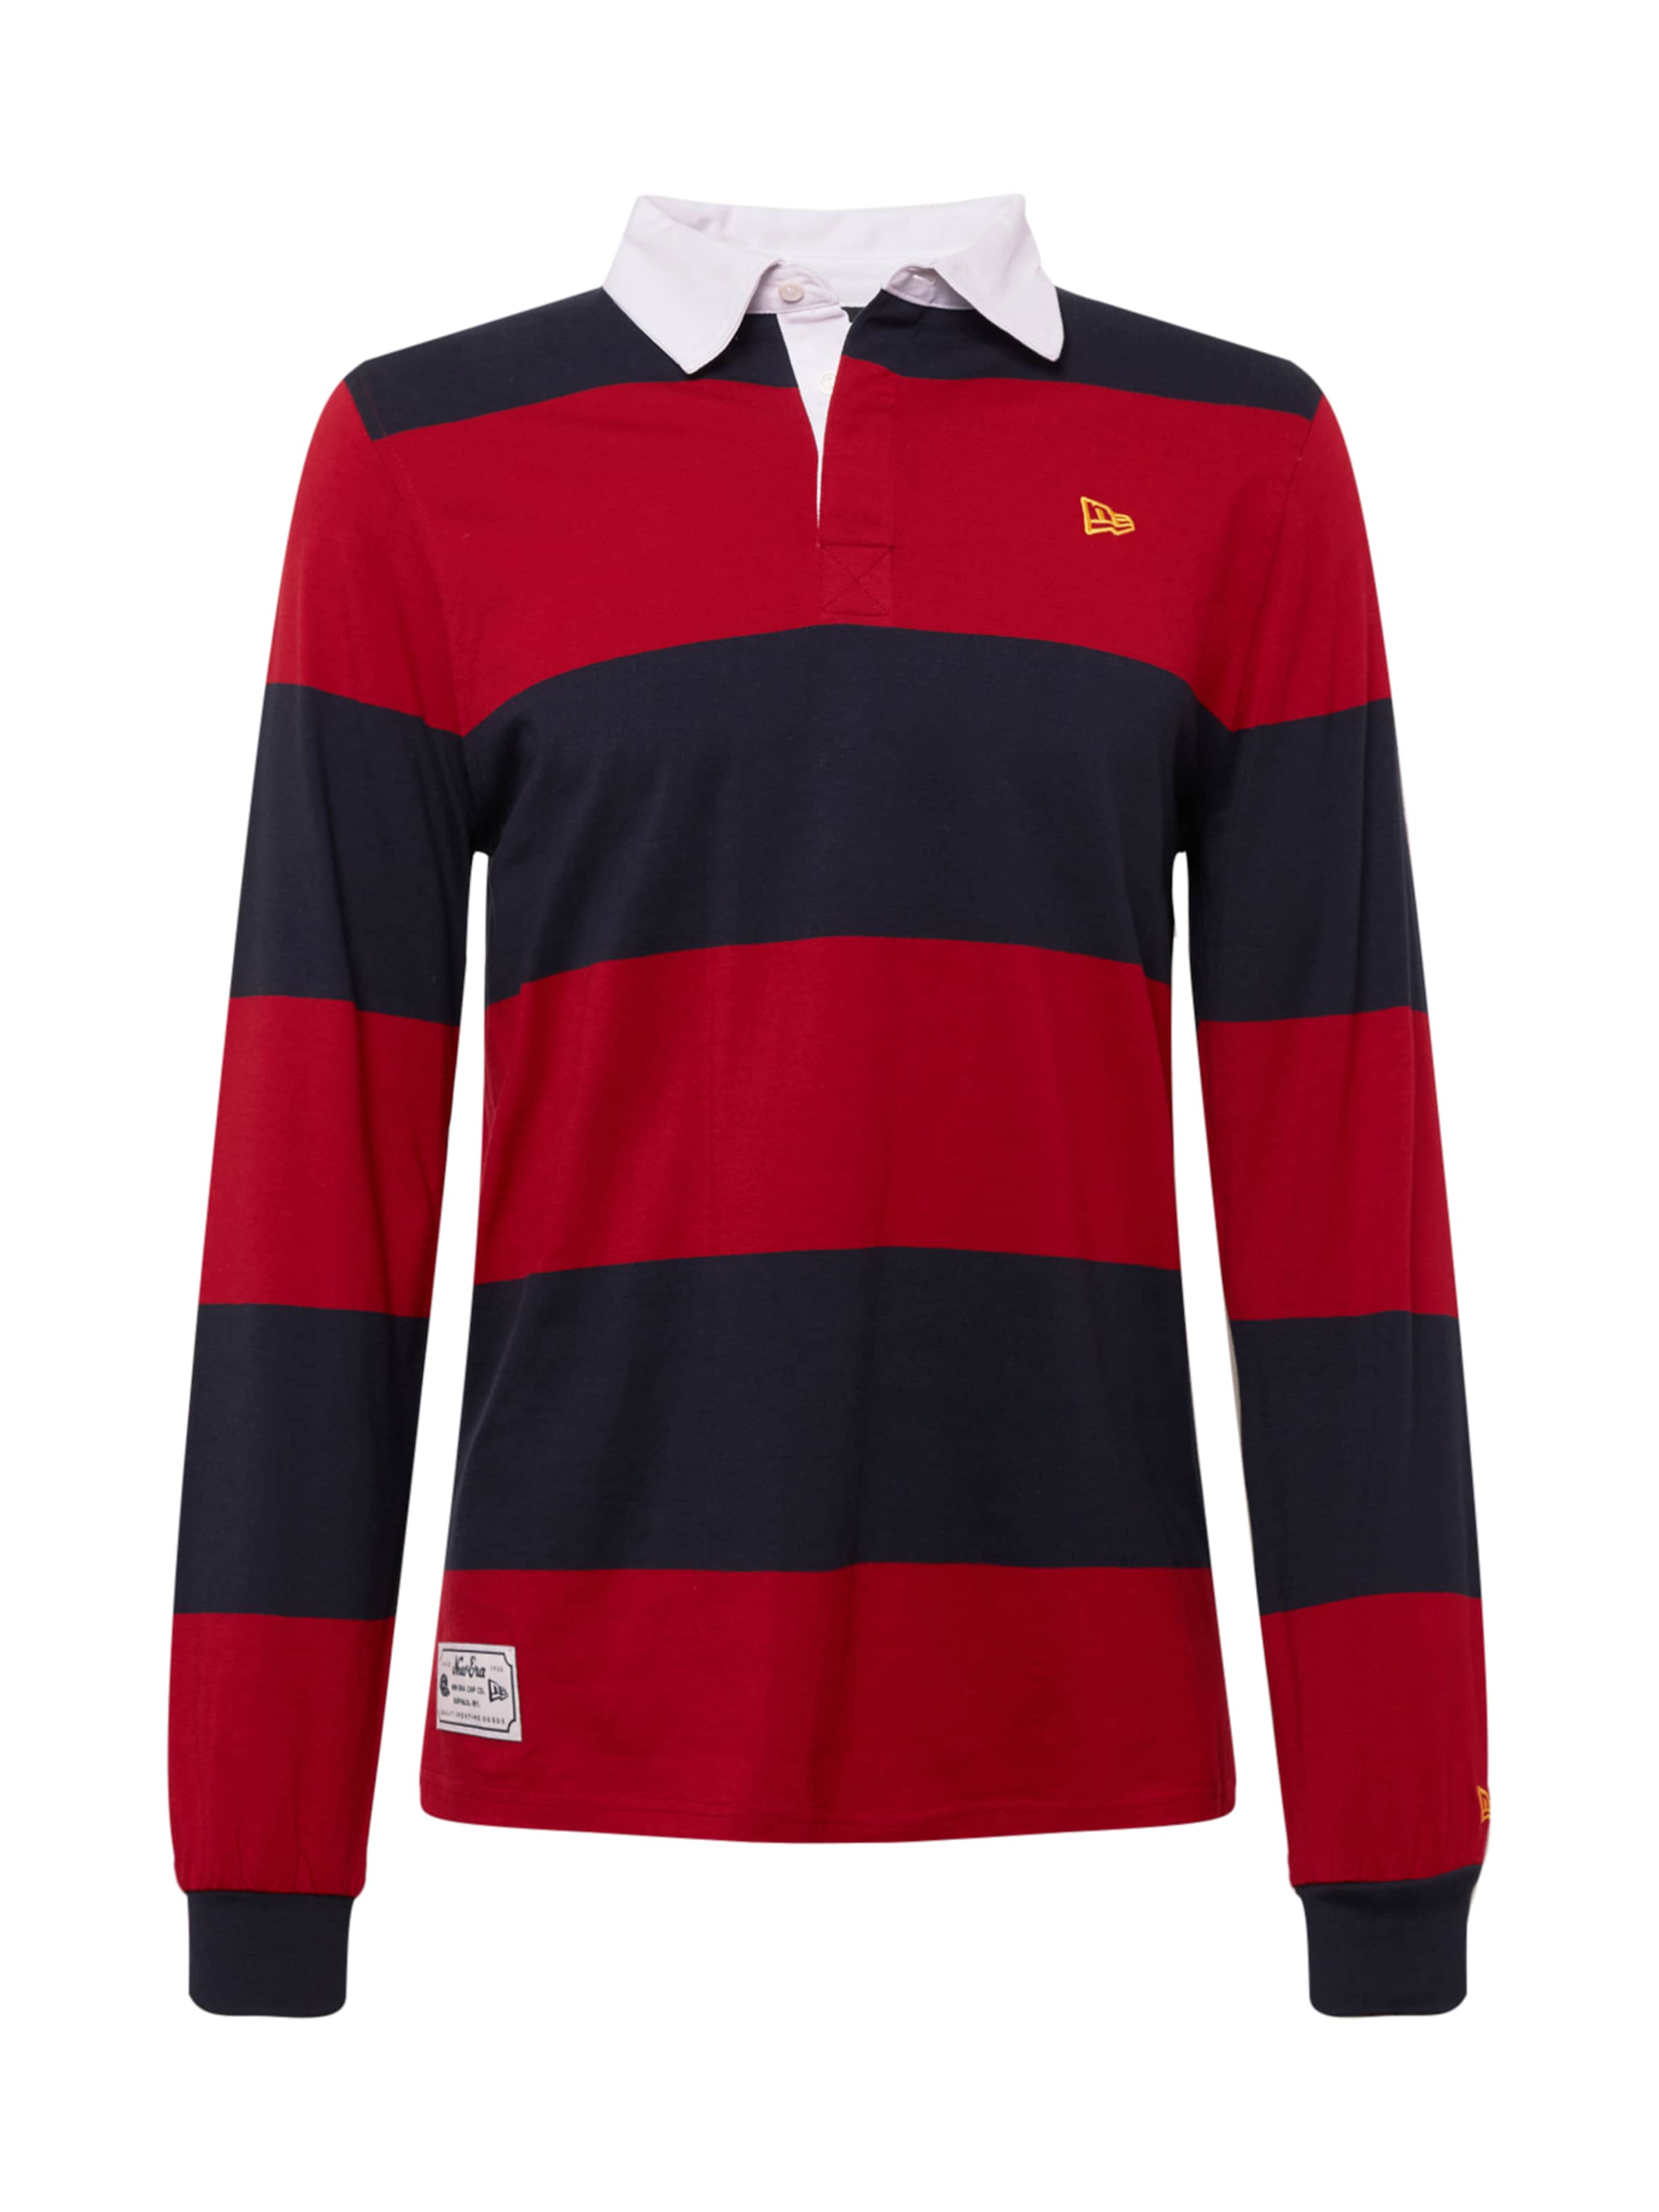 An1M8 Uomo NEW ERA Shirt in Rosso 